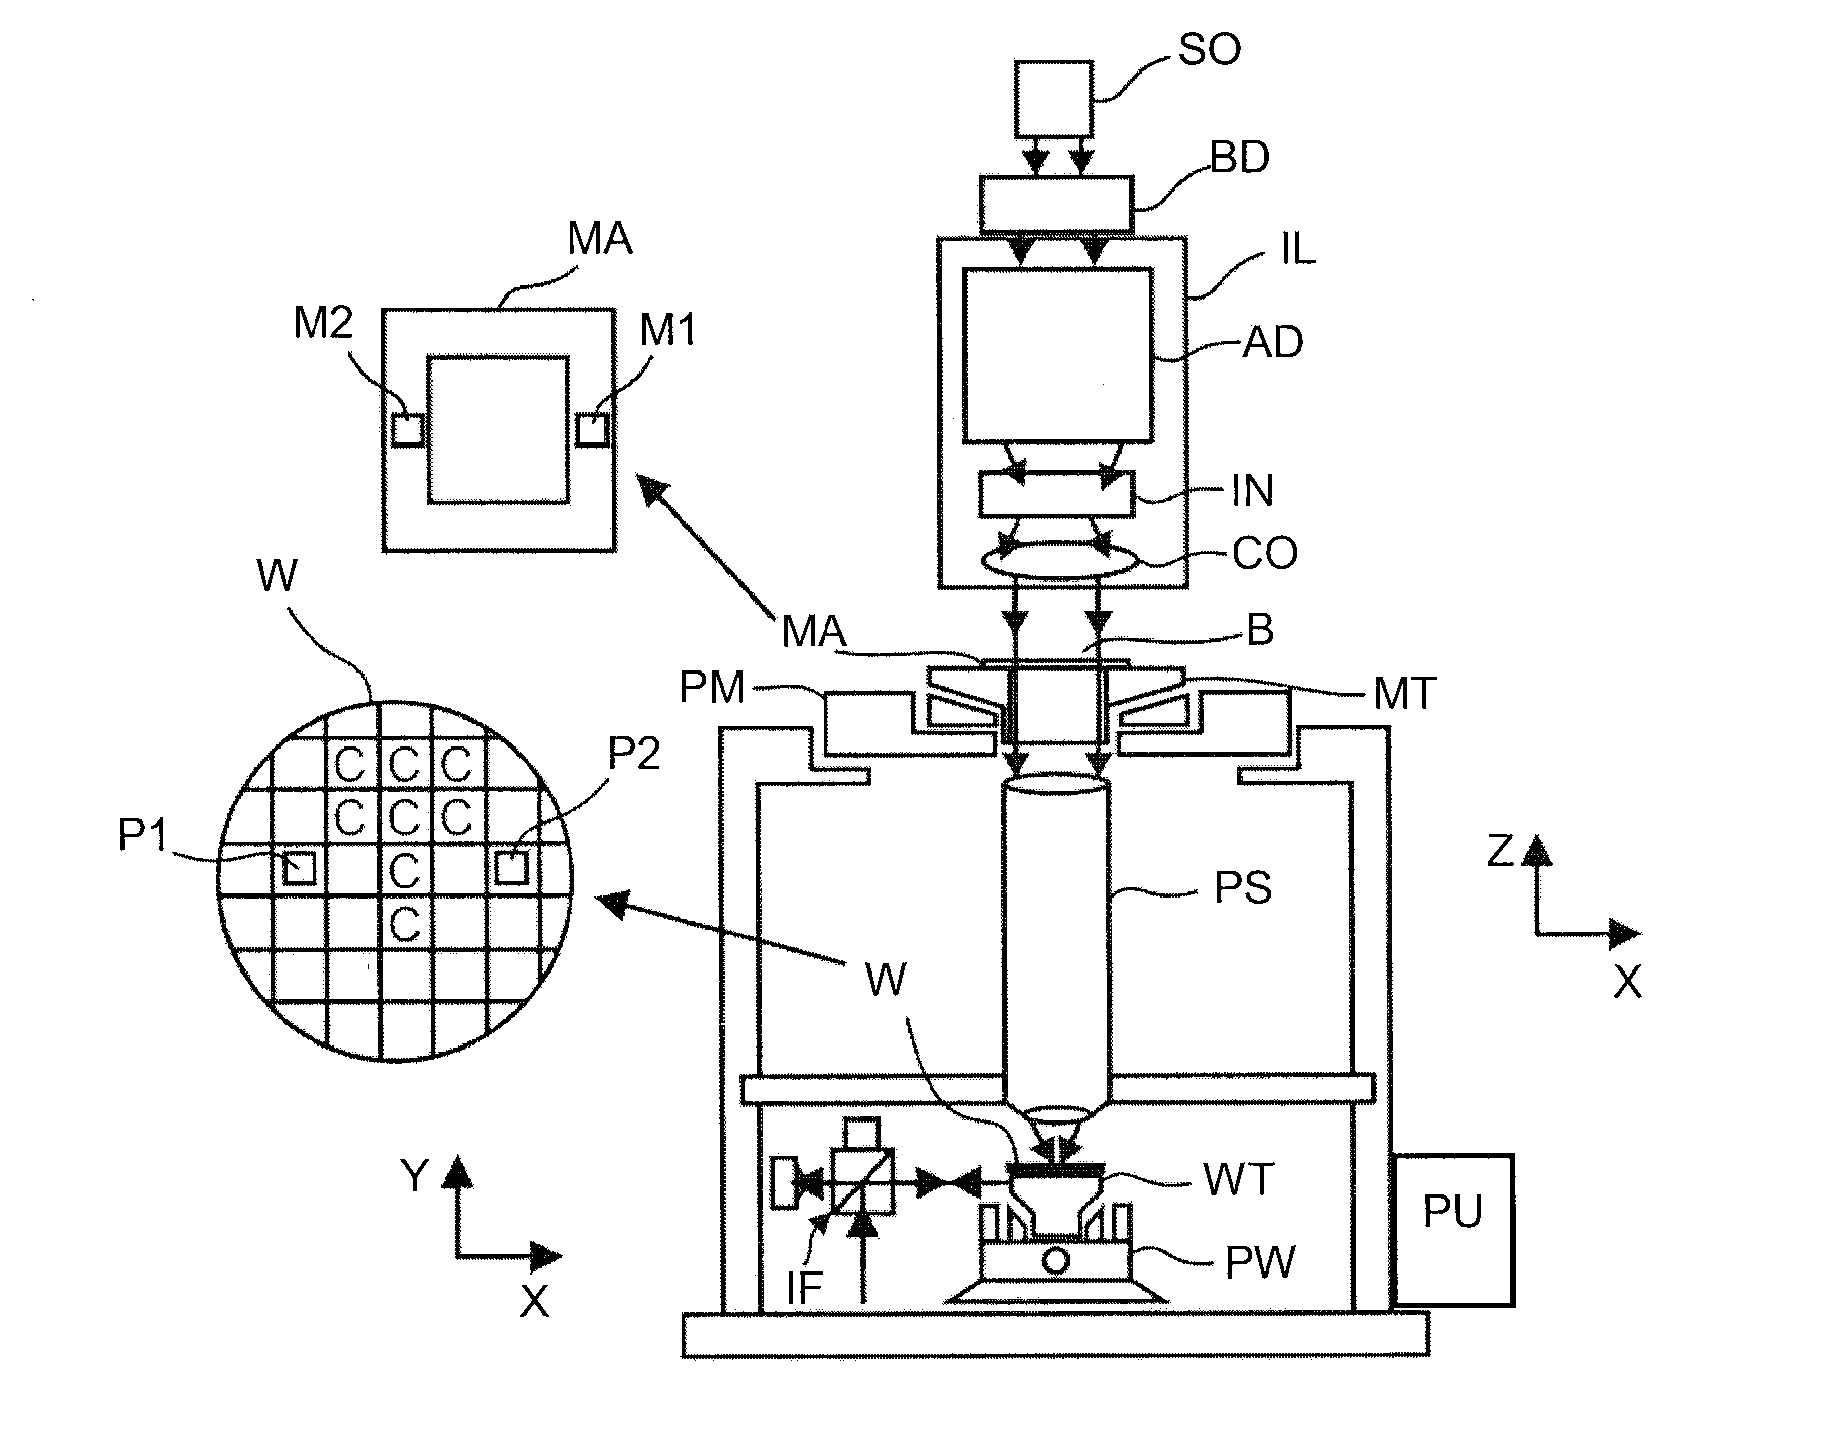 Lithographic apparatus, device manufacturing method, and method of applying a pattern to a substrate